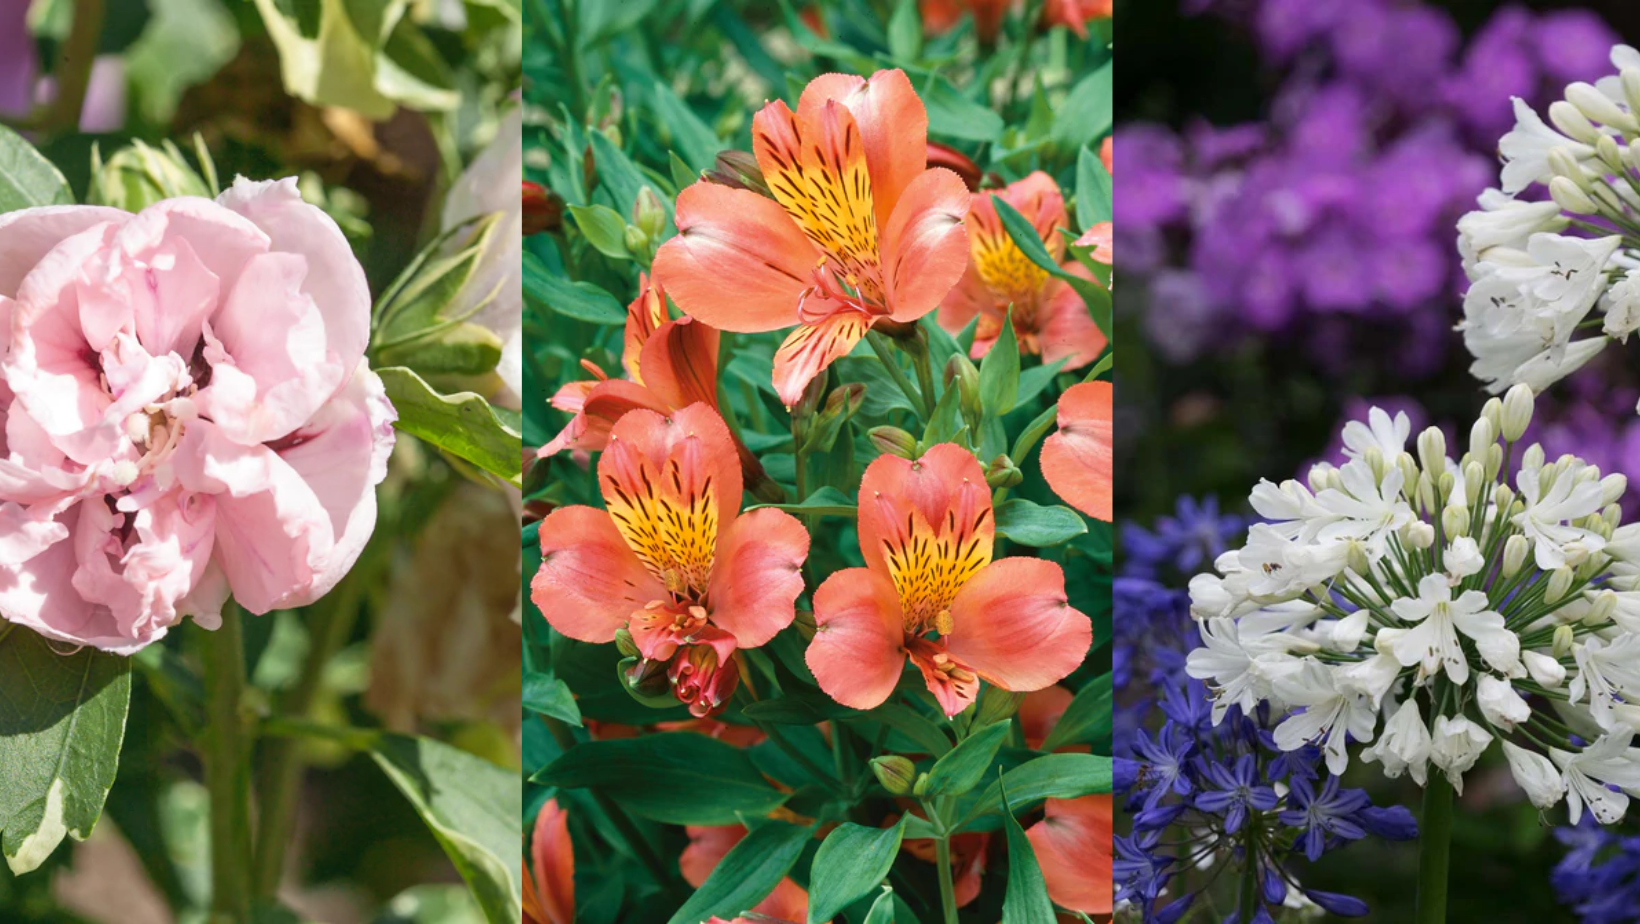 The Top 8 Plants For 'Instant Impact' In Your Garden